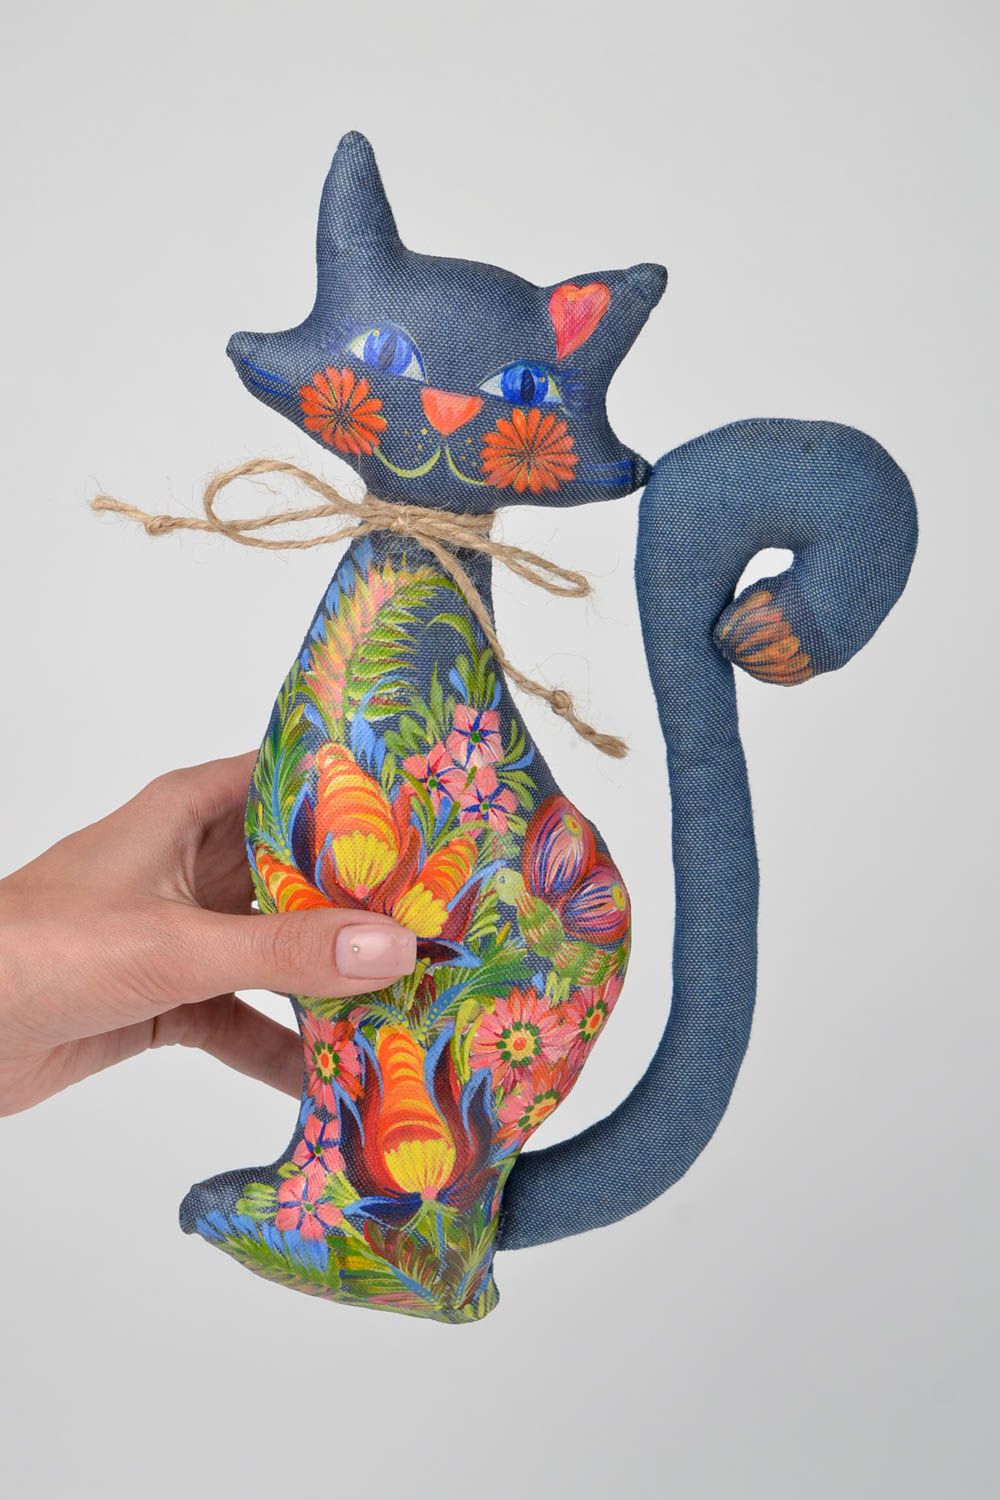 Handmade toy designer toy soft toy decor ideas unusual gift cat toy painted toy photo 2